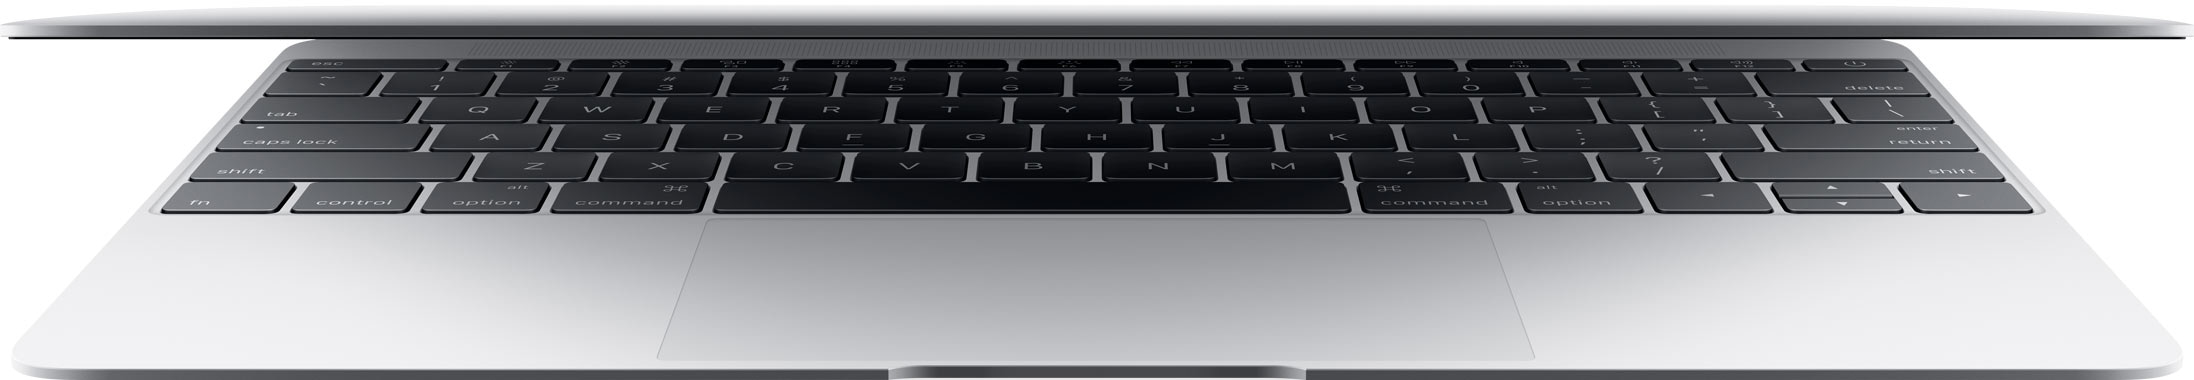 12-inch silver MacBook almost closed with keyboard highlighted